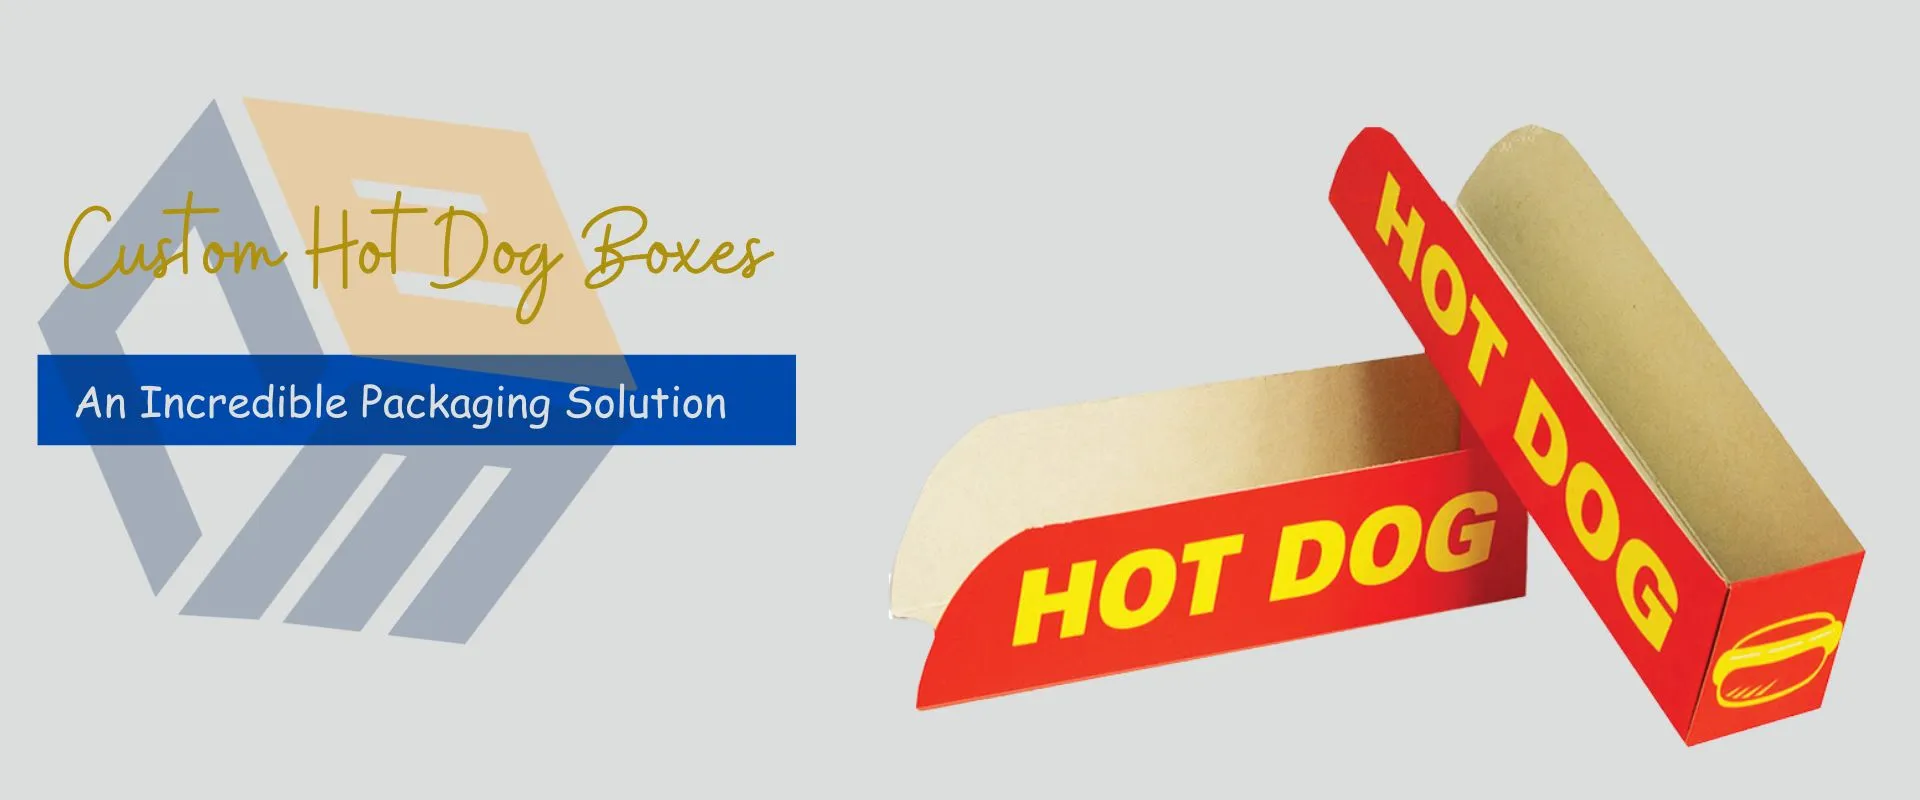 Custom Hot Dog Boxes An Incredible Packaging Solution